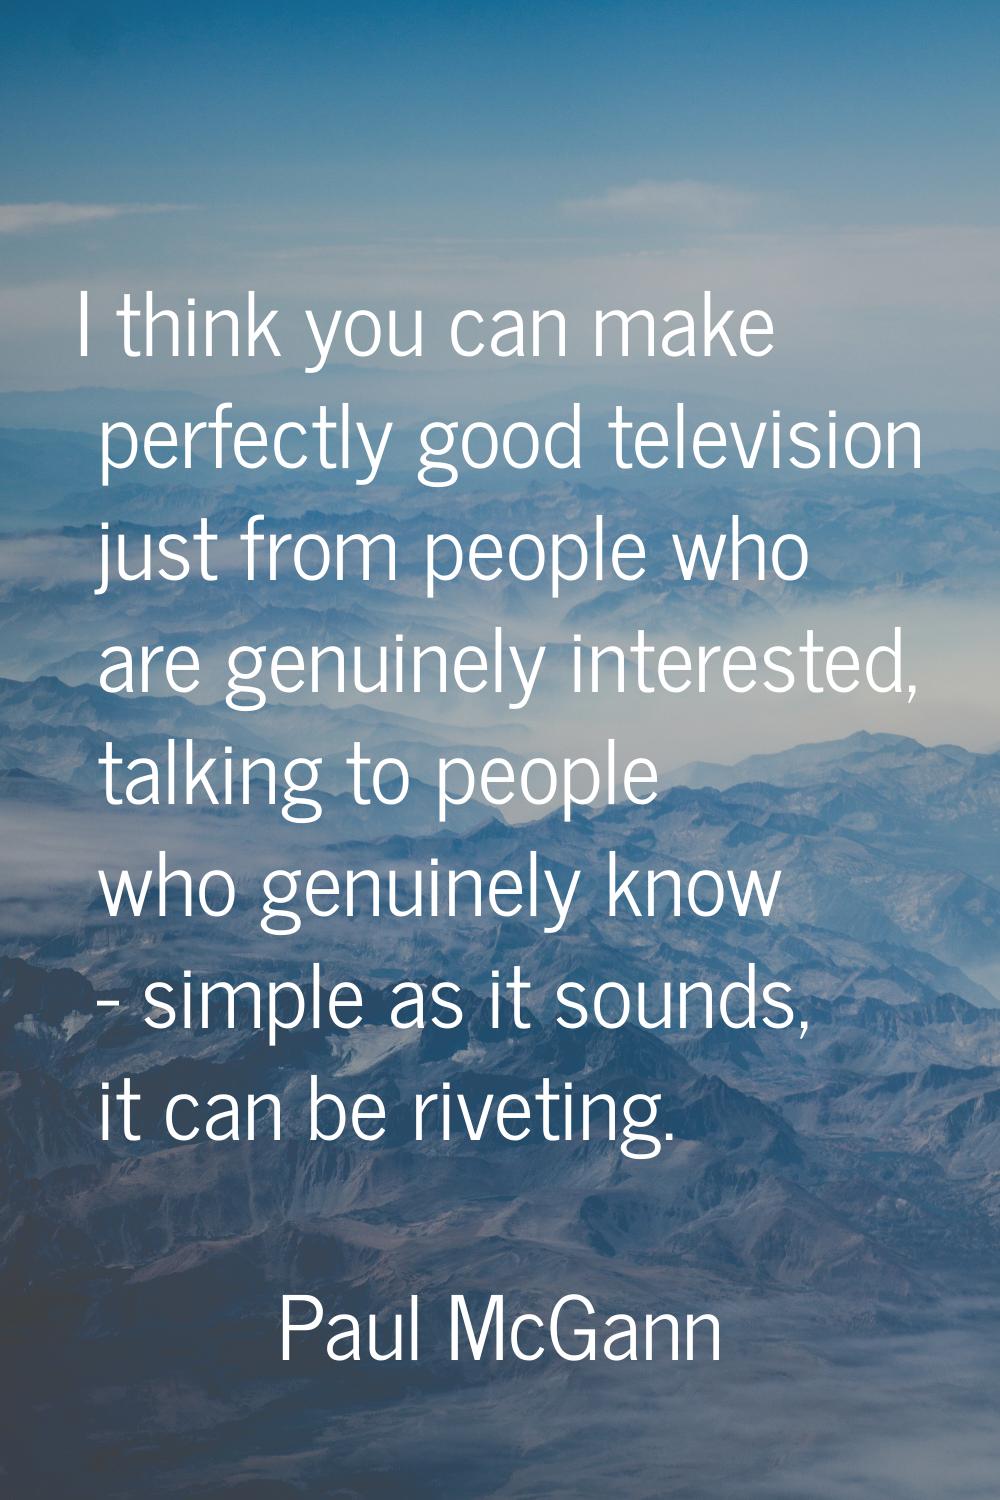 I think you can make perfectly good television just from people who are genuinely interested, talki